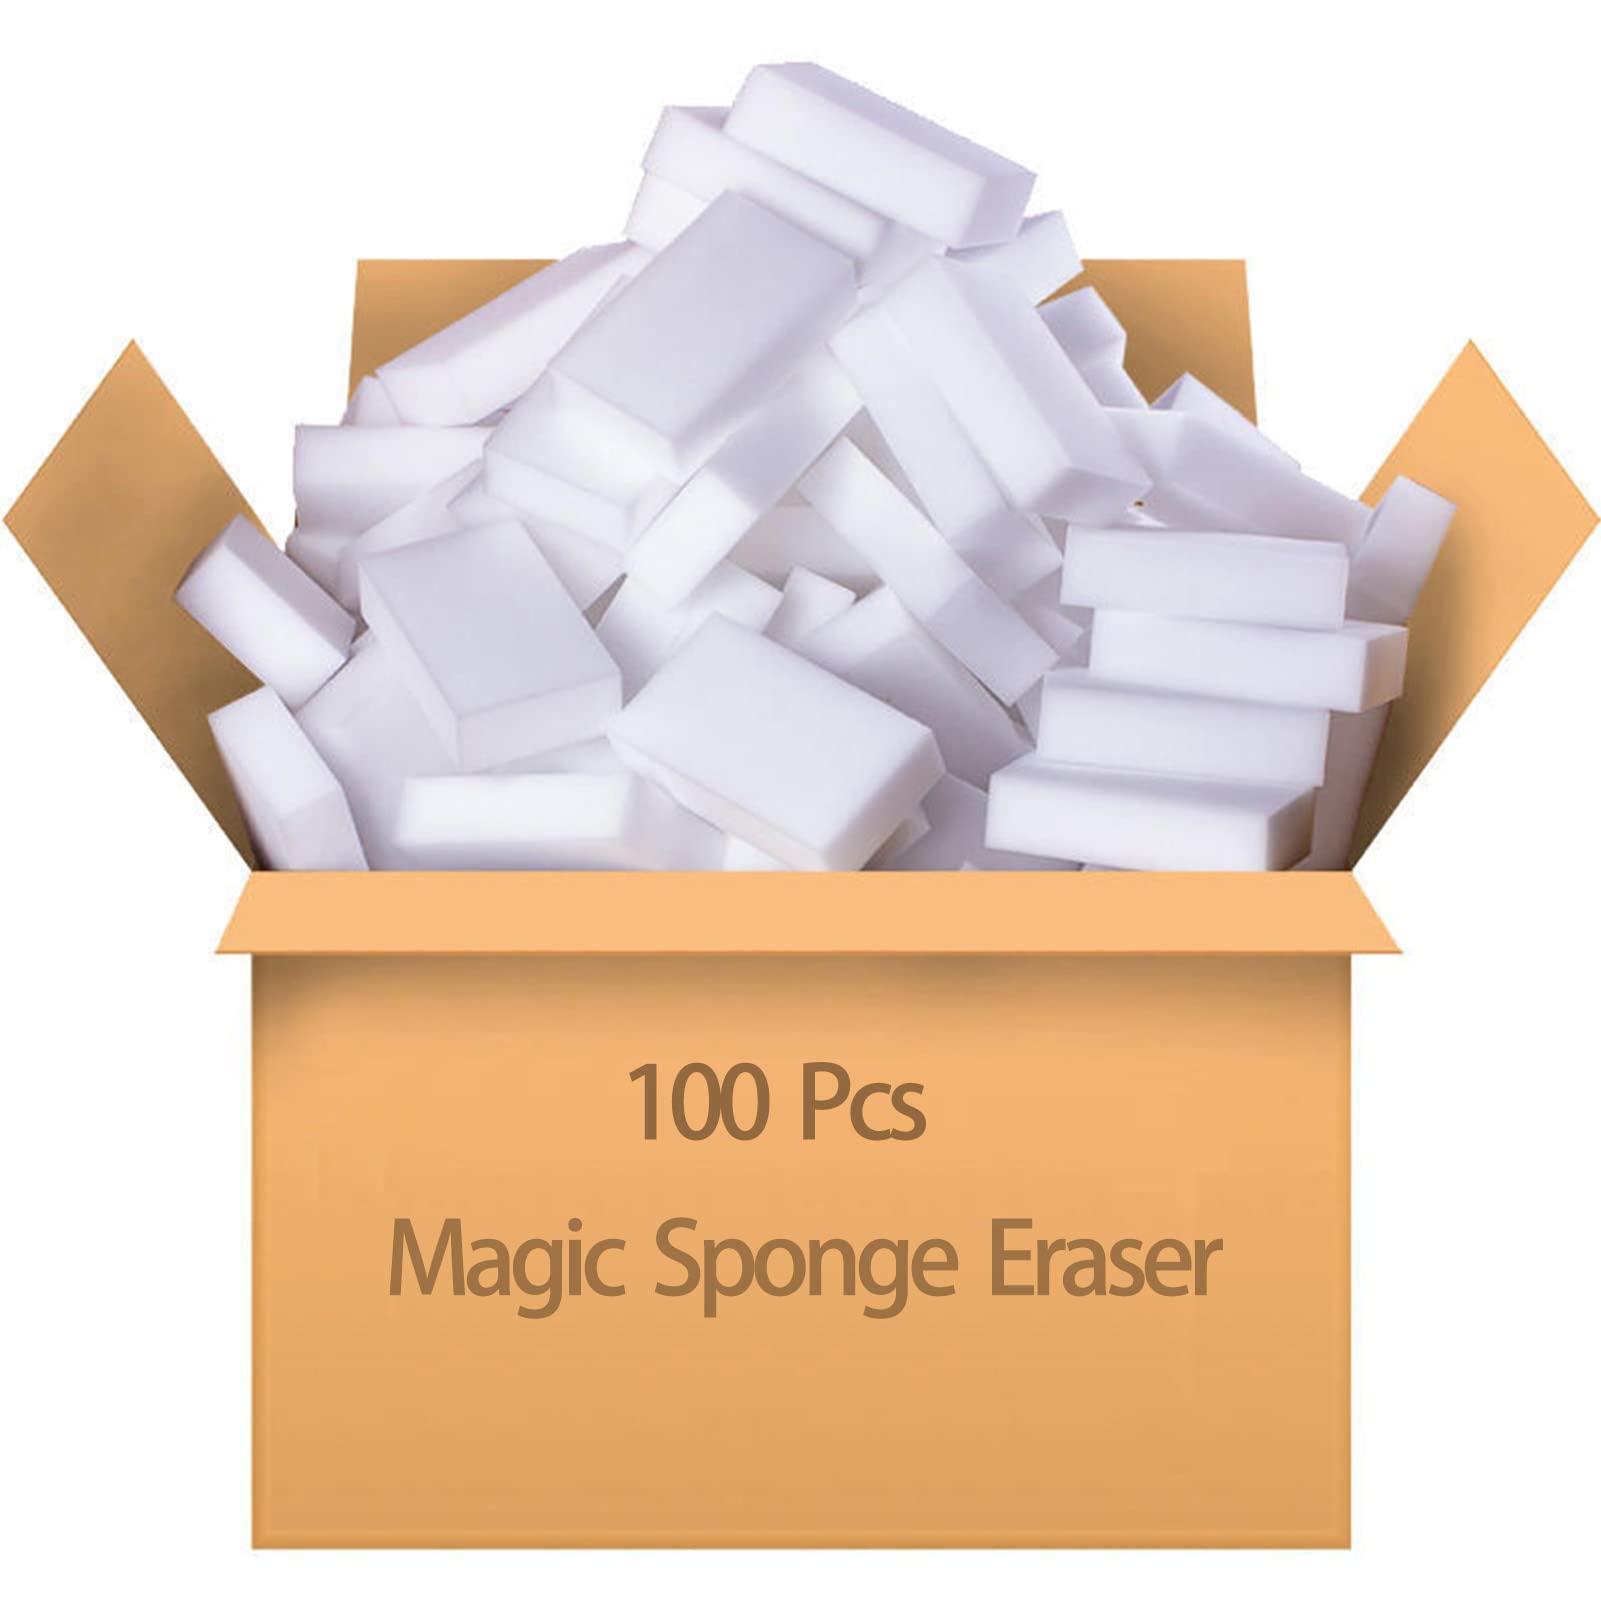 100 Pcs Magic Sponge Eraser Shoxil, Melamine Foam Extra Large Cleaning Pads for Household Cleaning Kitchen Dish Car Shoes Sponges